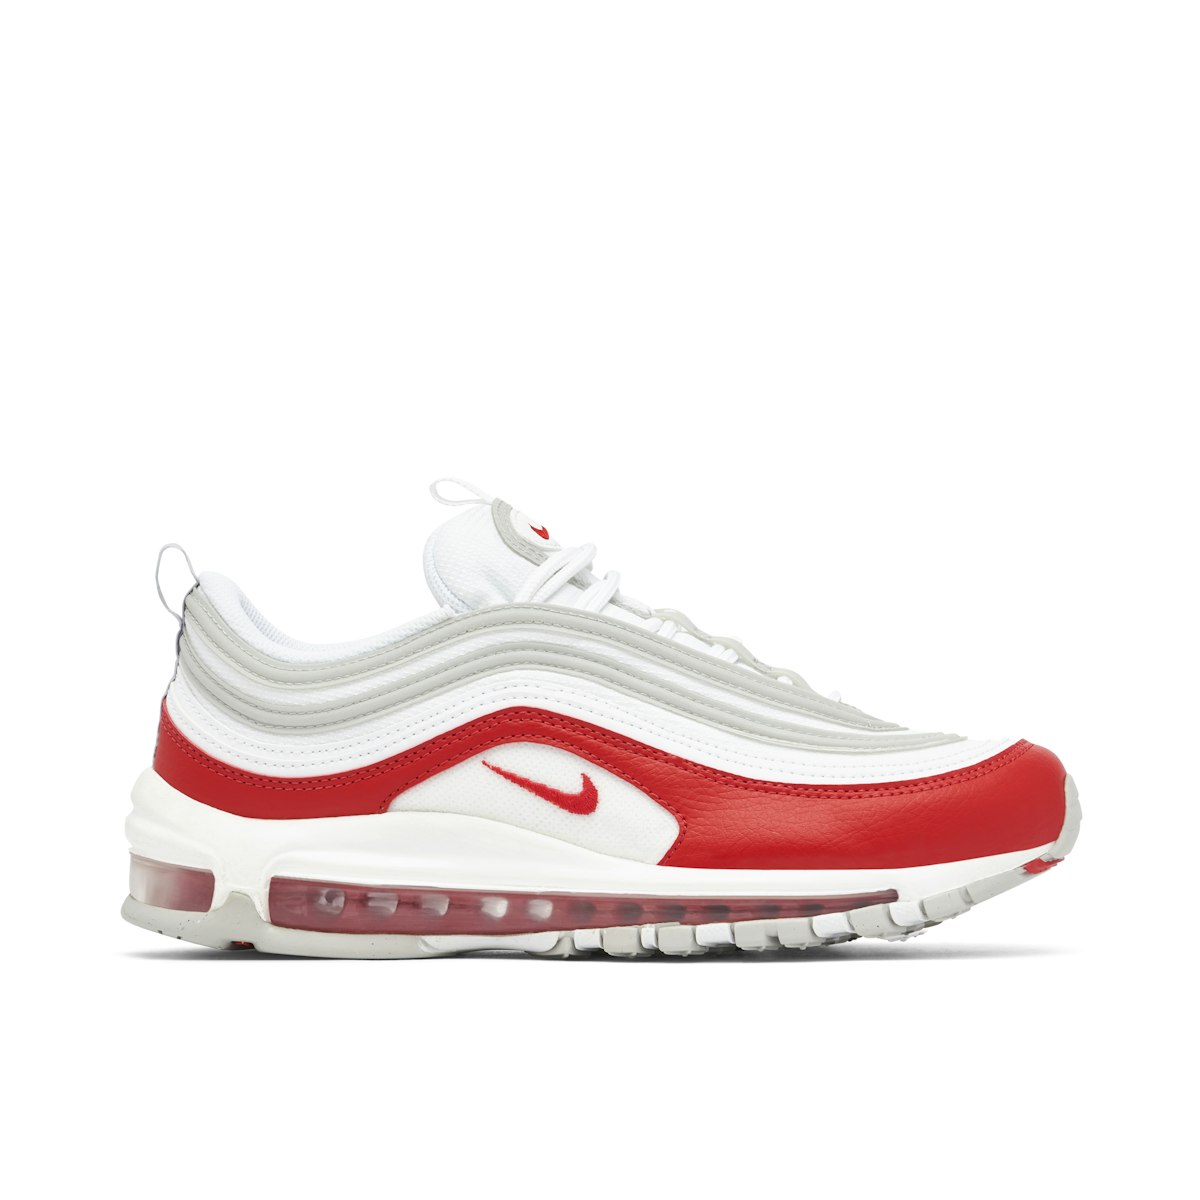 Air Max 97 White University Red | DX8964-100 | Laced